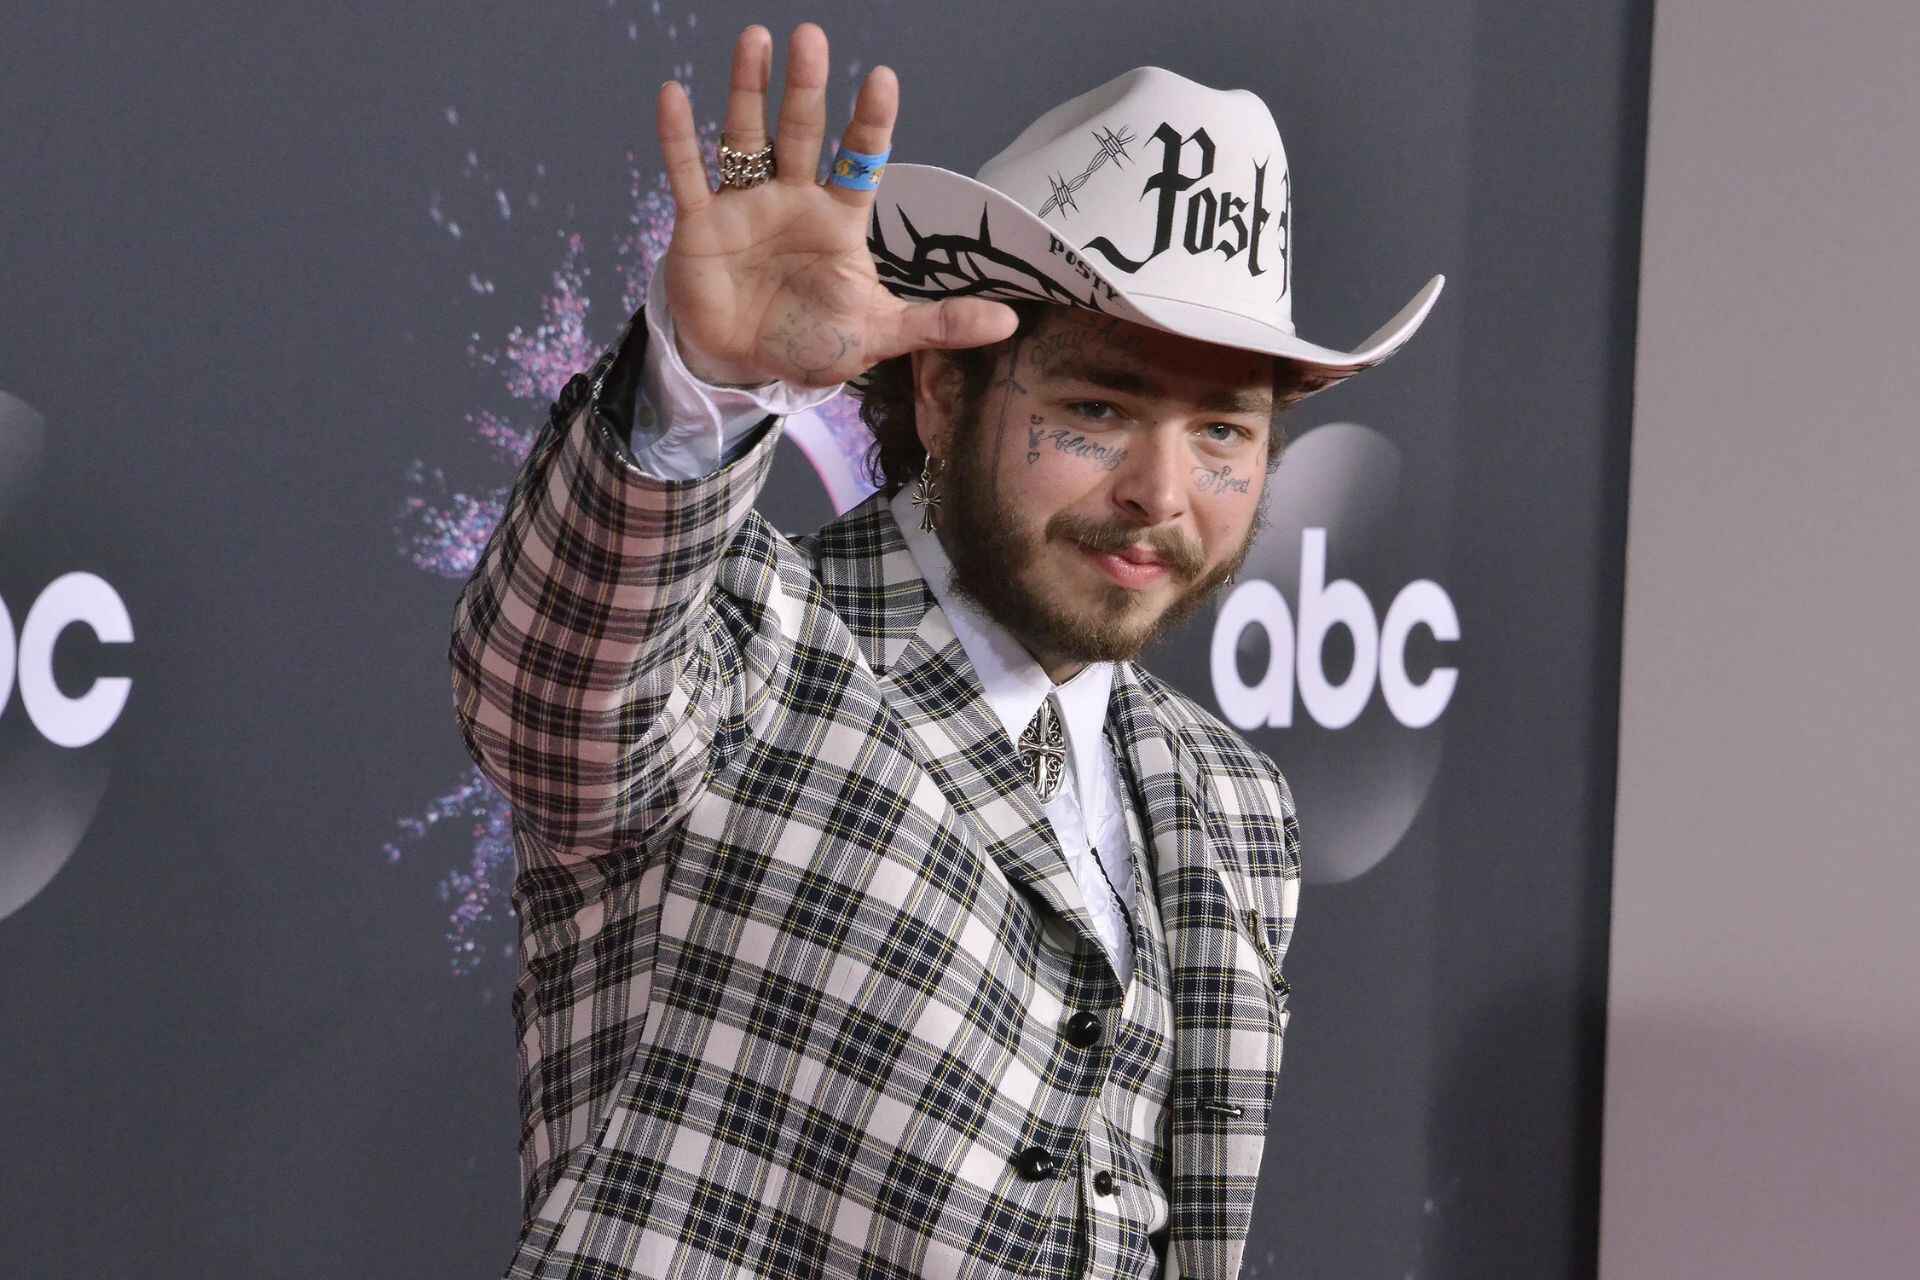 Post Malone Collaborates With Cheatin Snakes Designer For New Dallas Cowboys Clothing Line